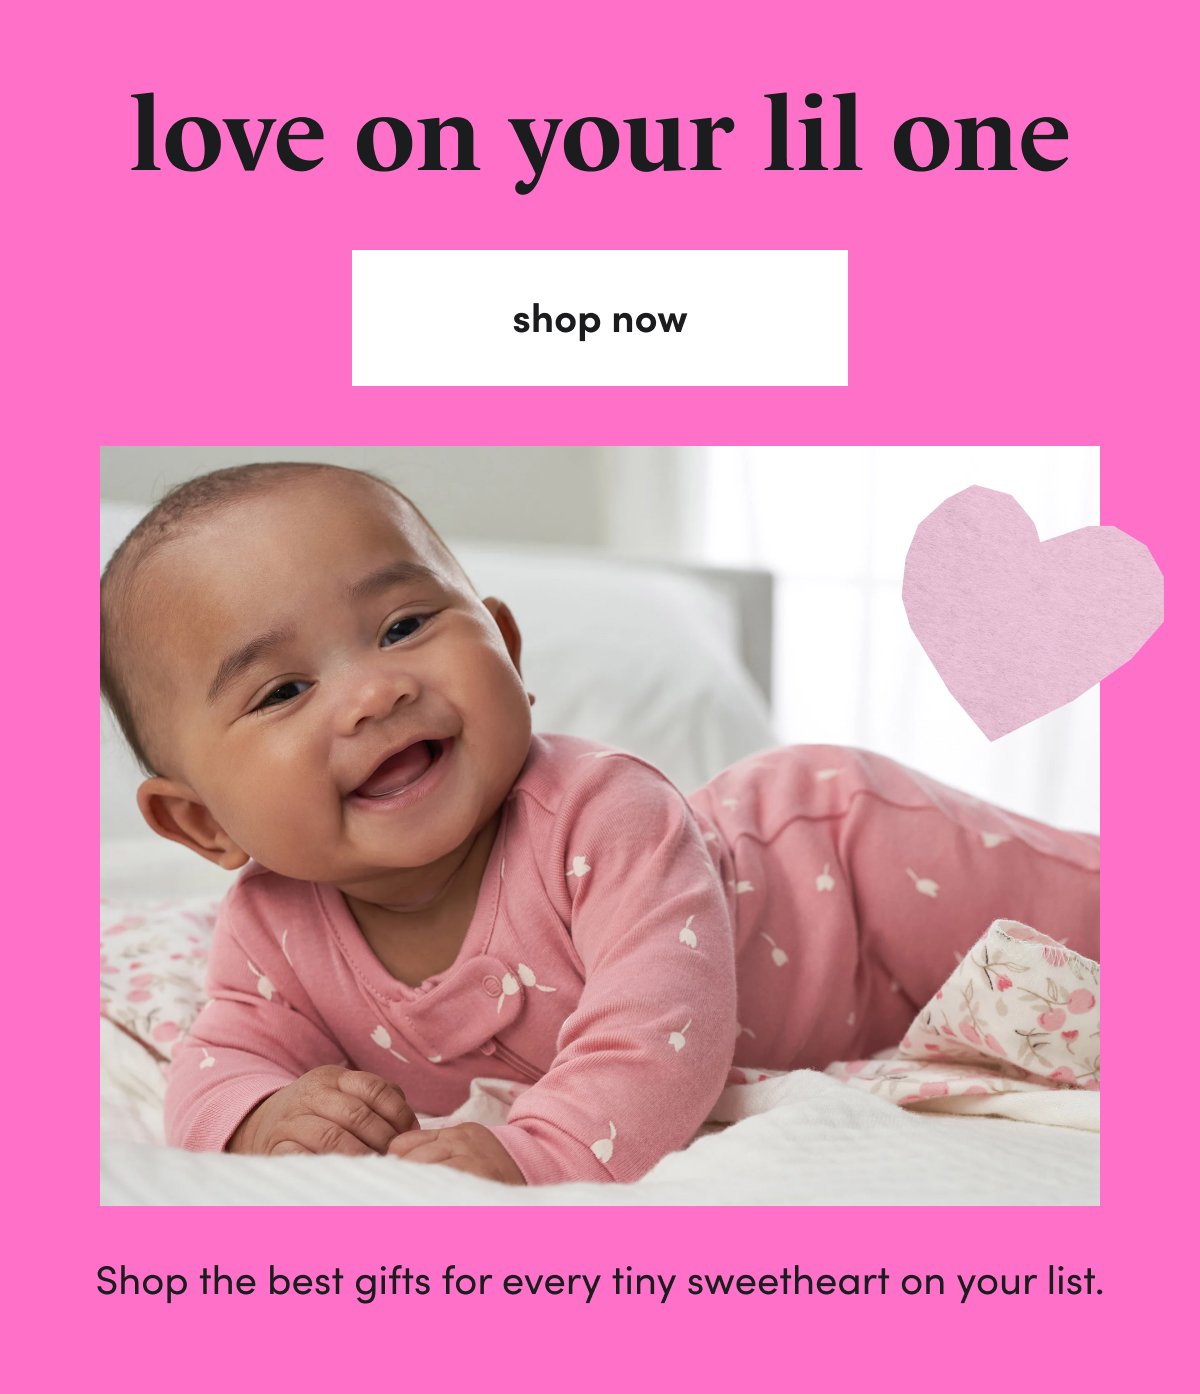 love on your lil one Shop the best gifts\xa0for every tiny\xa0sweetheart on your list. shop now